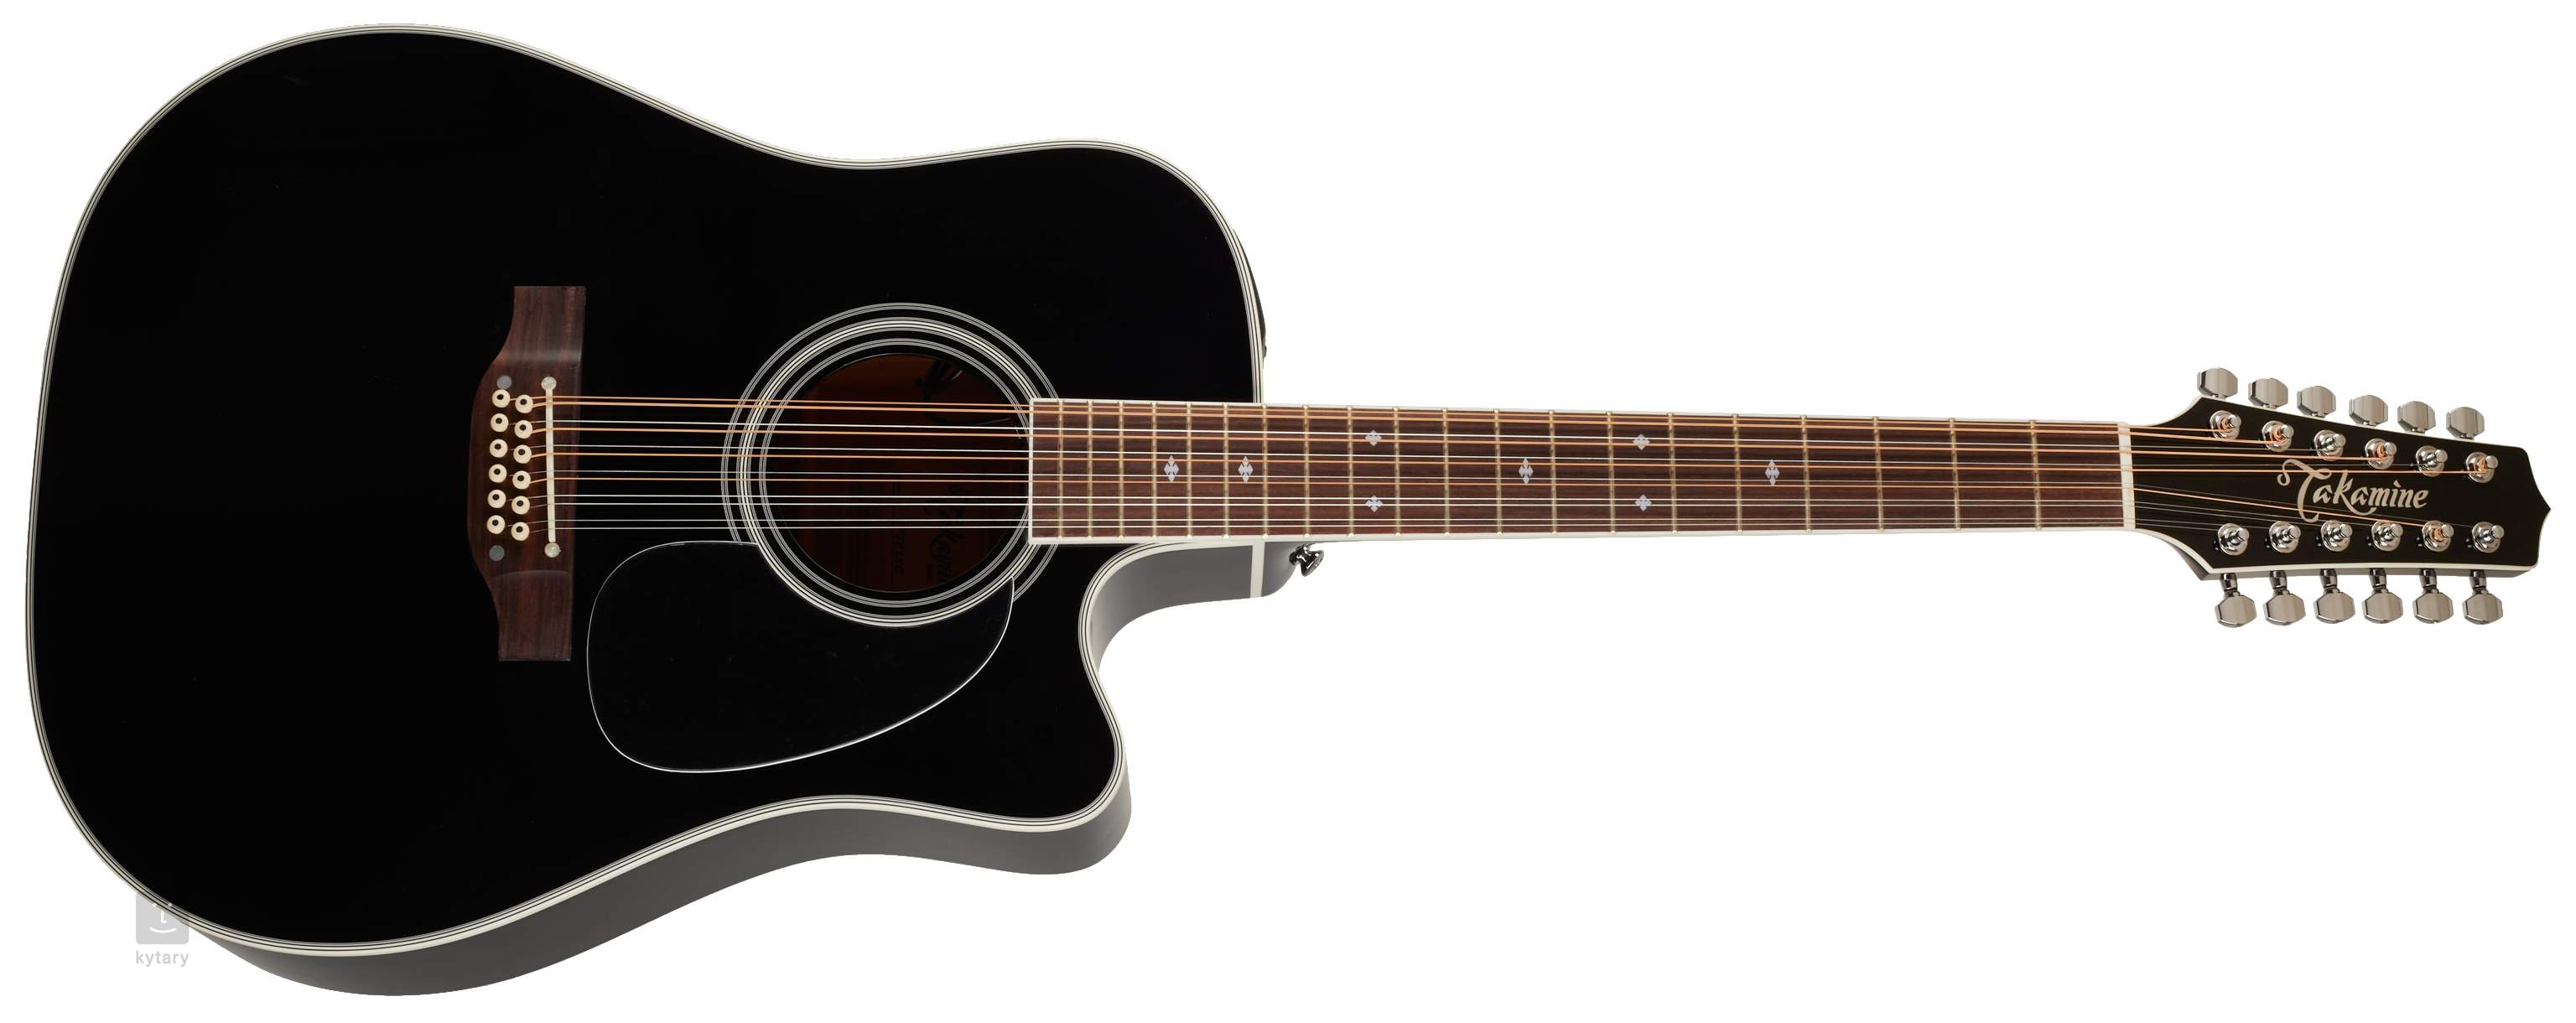 What model takamine do i have?